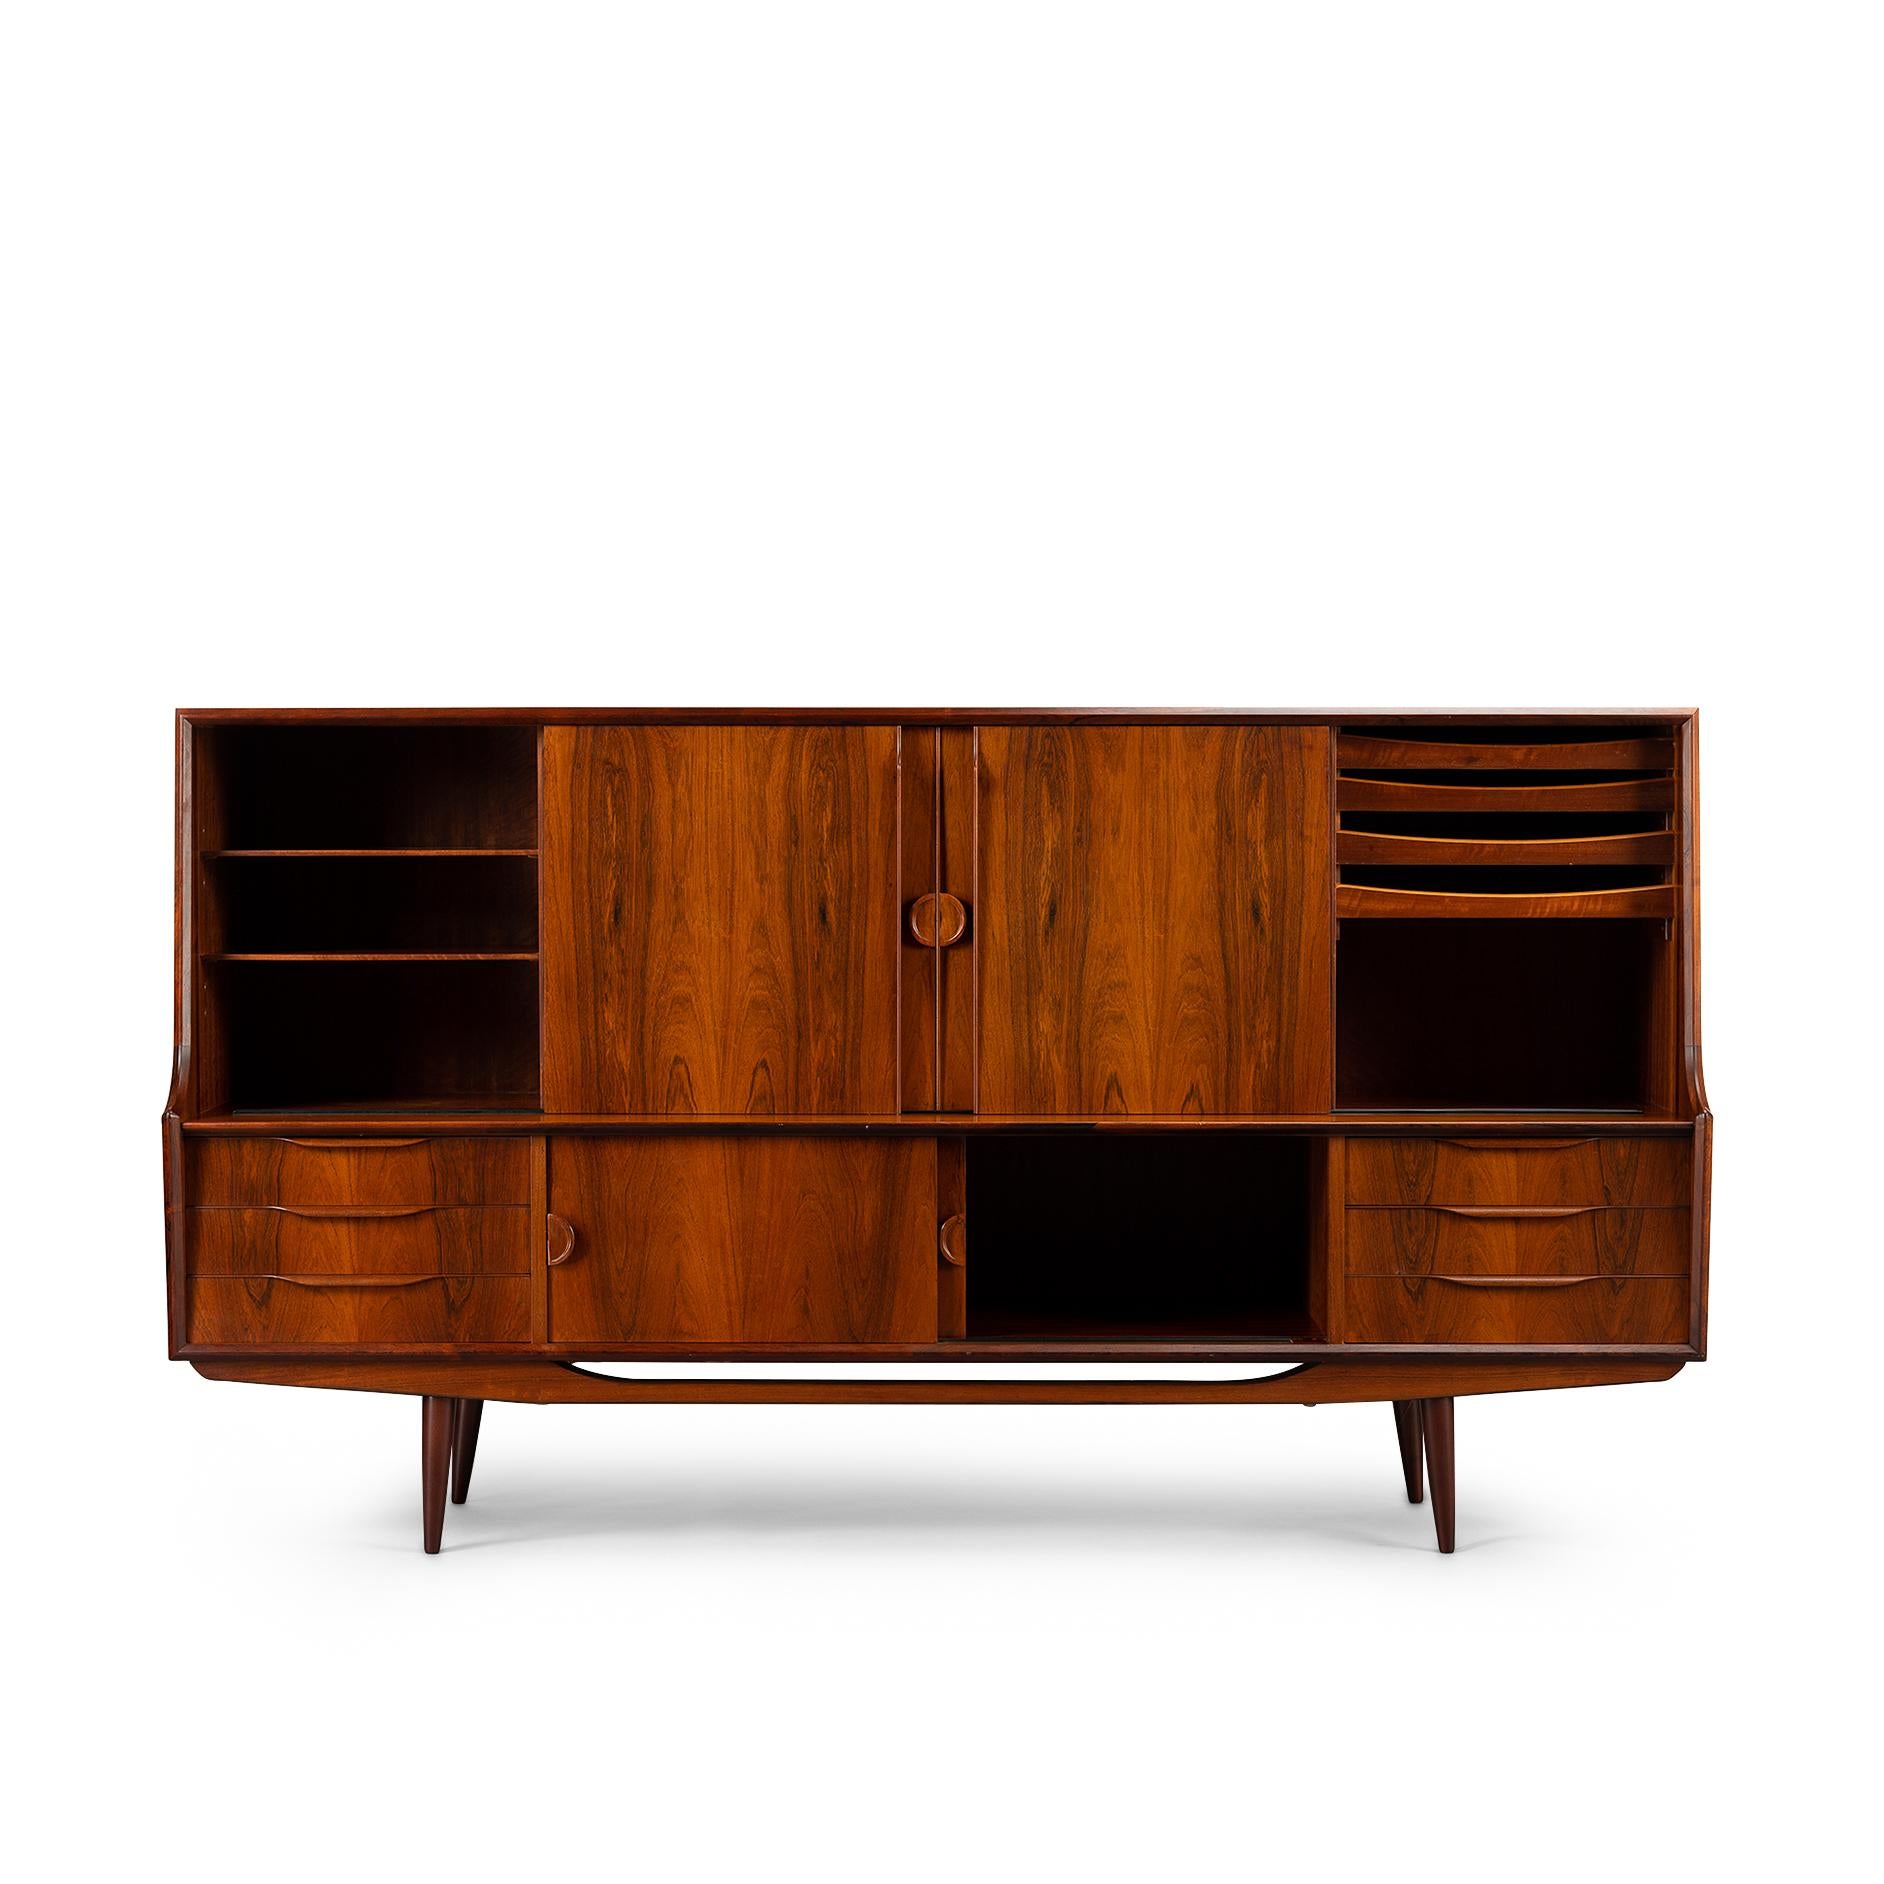 Listen up! This sideboard tickles all your senses. Most pronounced are the grips, ear shape cut out of solid rosewood. The sideboard cut from rosewood veneer stands wide legged ready to go and firm on its beautifully crafted base. Further detail for